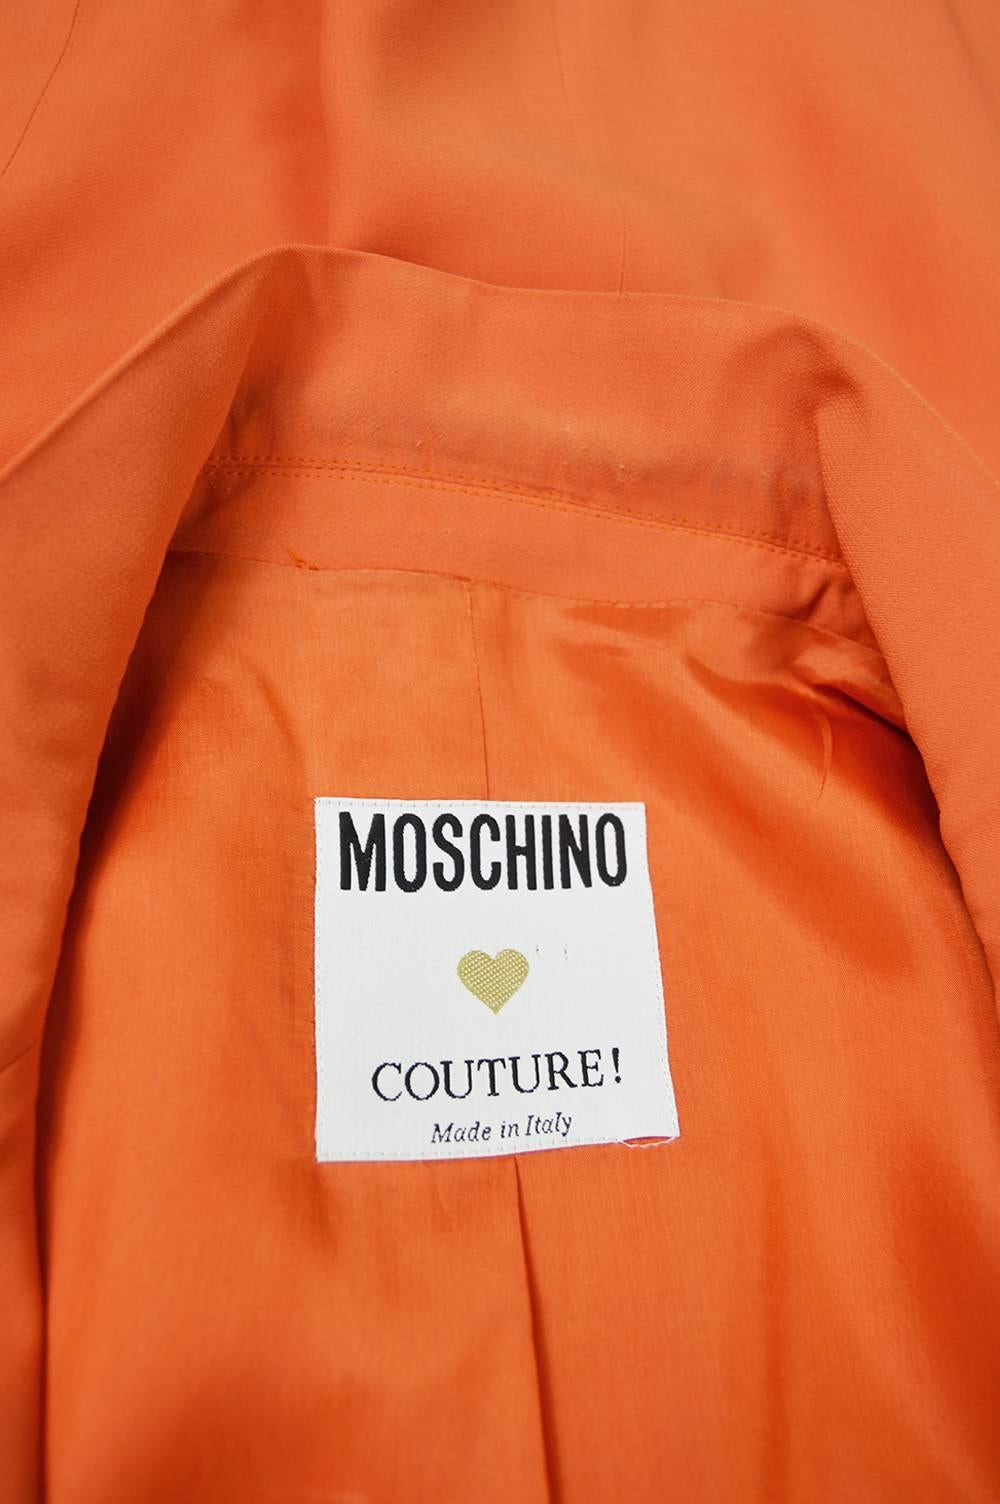 Moschino Couture Vintage 